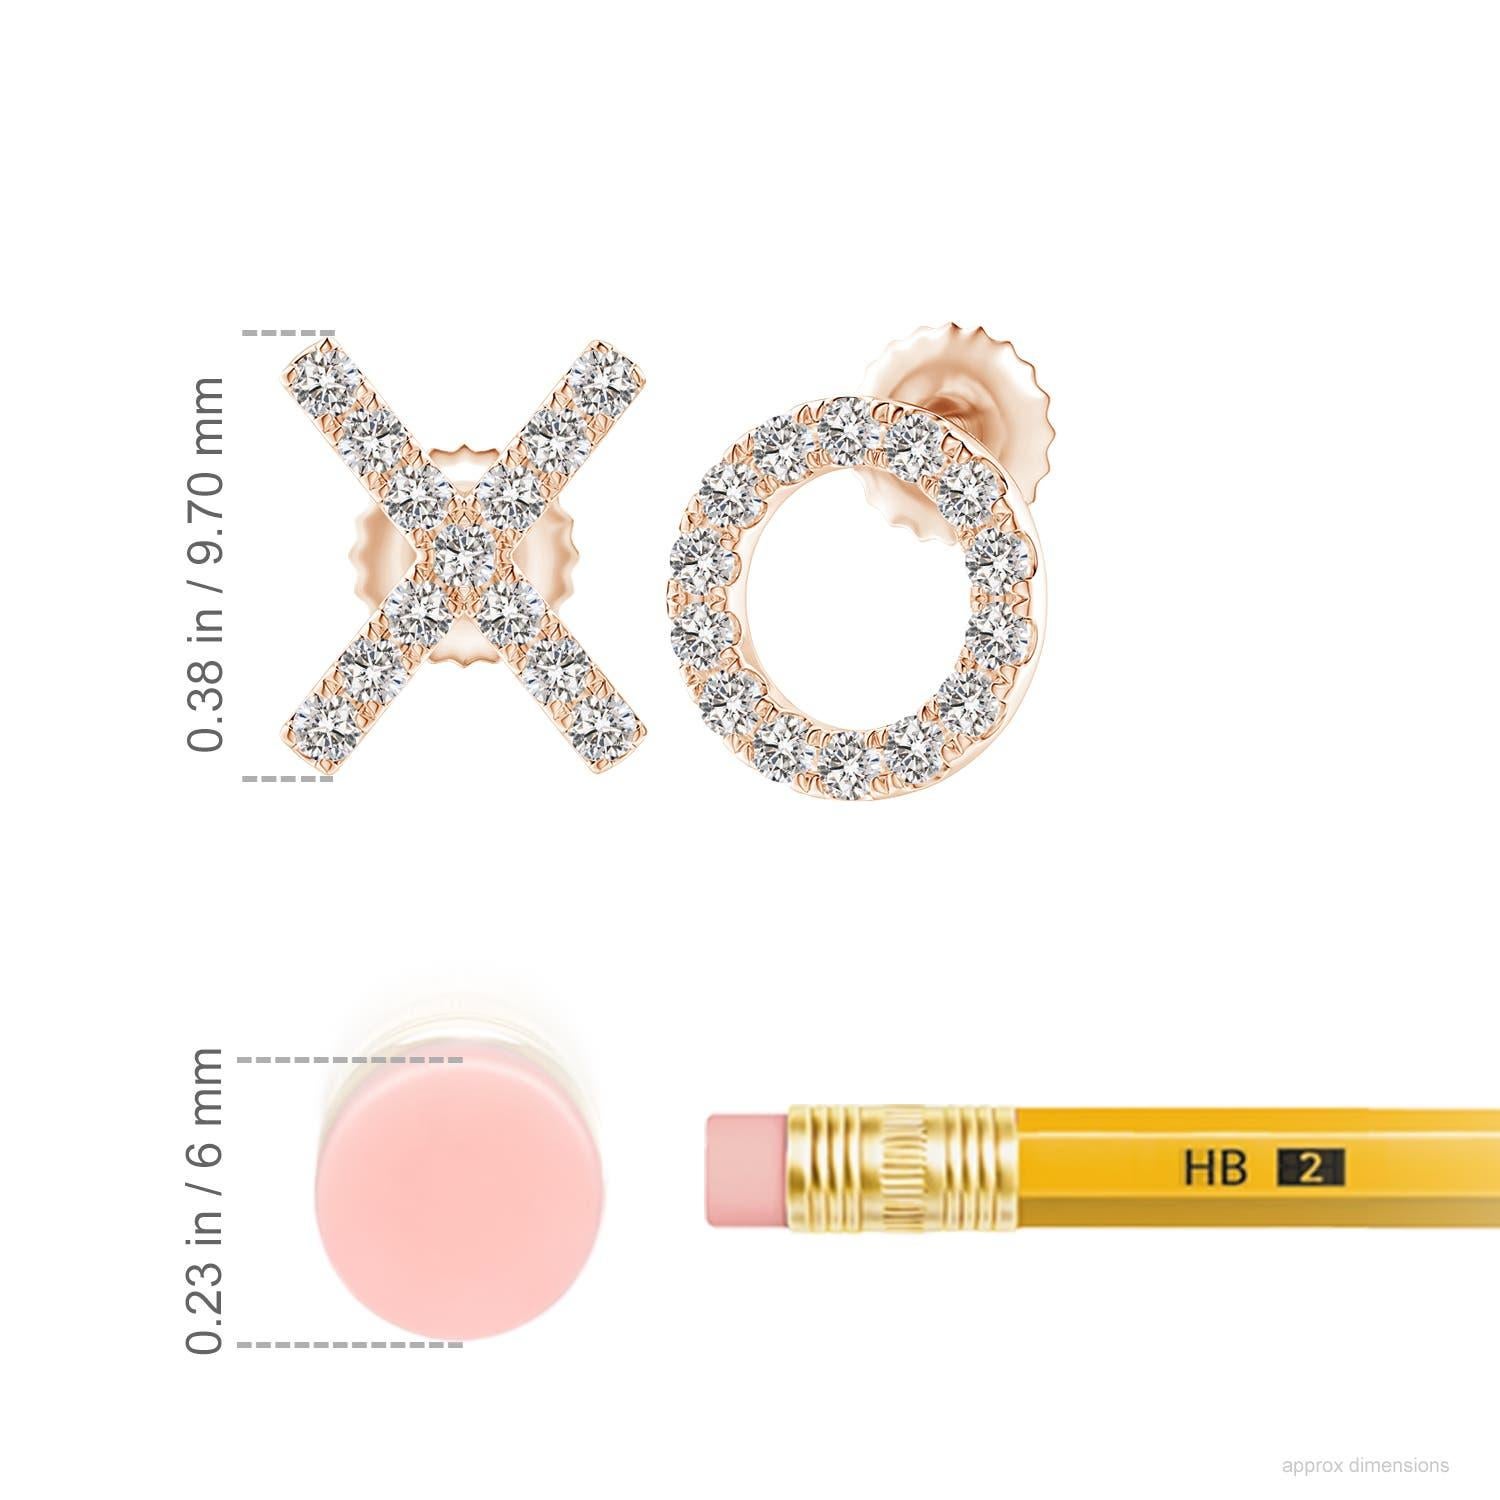 The XO stud earrings designed in 14k rose gold are simply fascinating. Sparkling round diamonds in a U pava setting brilliantly embellish the XO pattern, adding a dazzling touch to these adorable stud earrings.
Diamond is the Birthstone for April